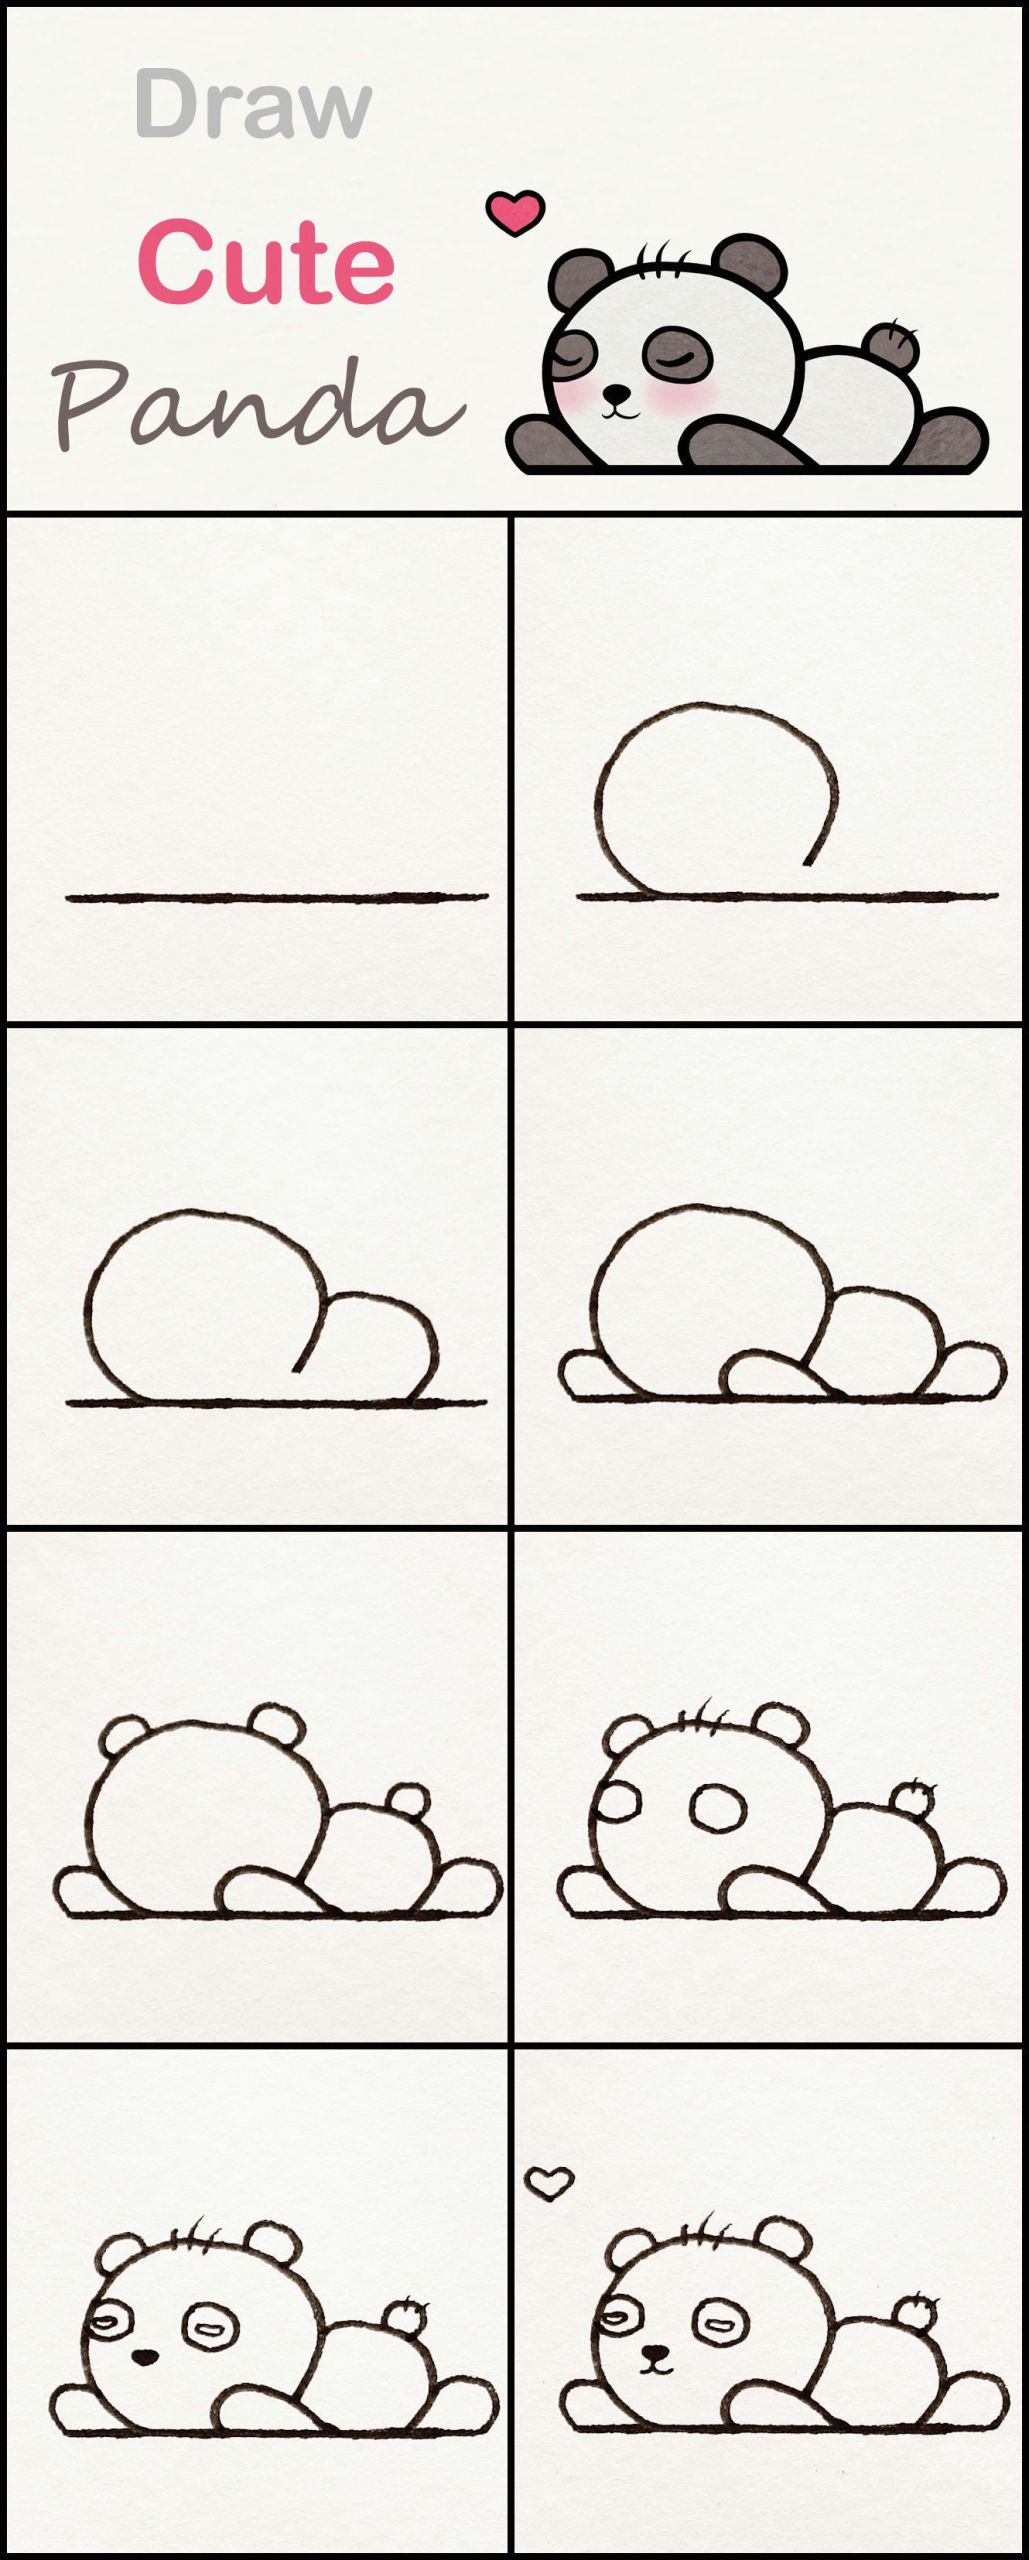 Easy How to Draw Cute Animals Learn How to Draw A Cute Baby Panda Step by Step A Very